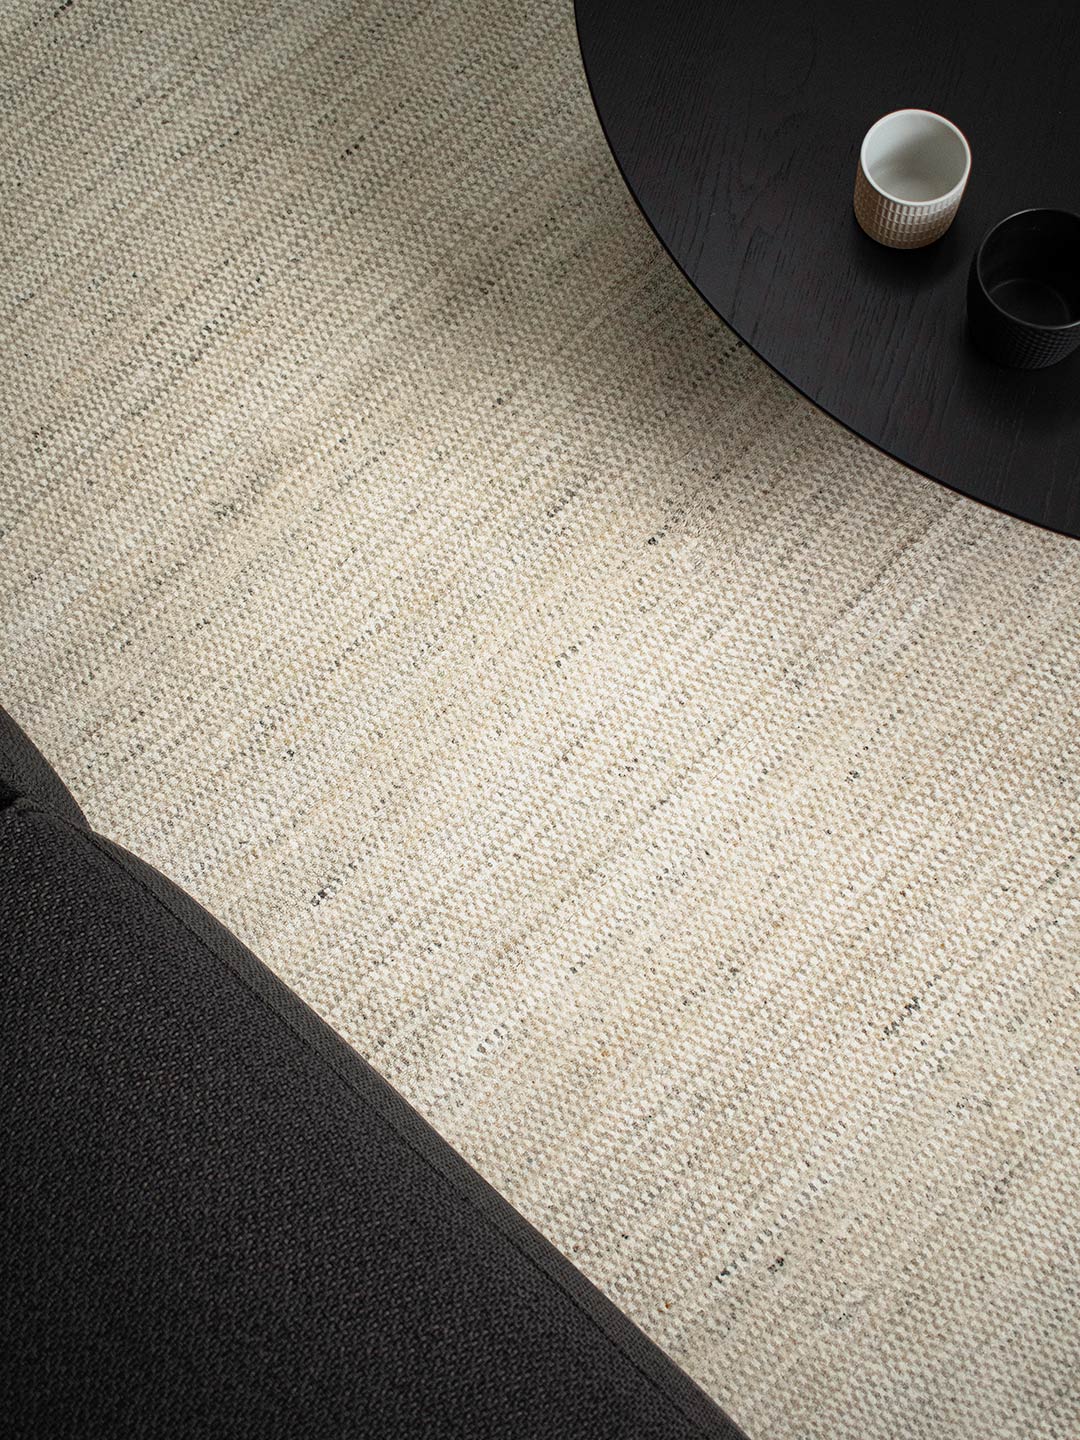 Mystique Wool rug in Ivory Sand detail of pattern